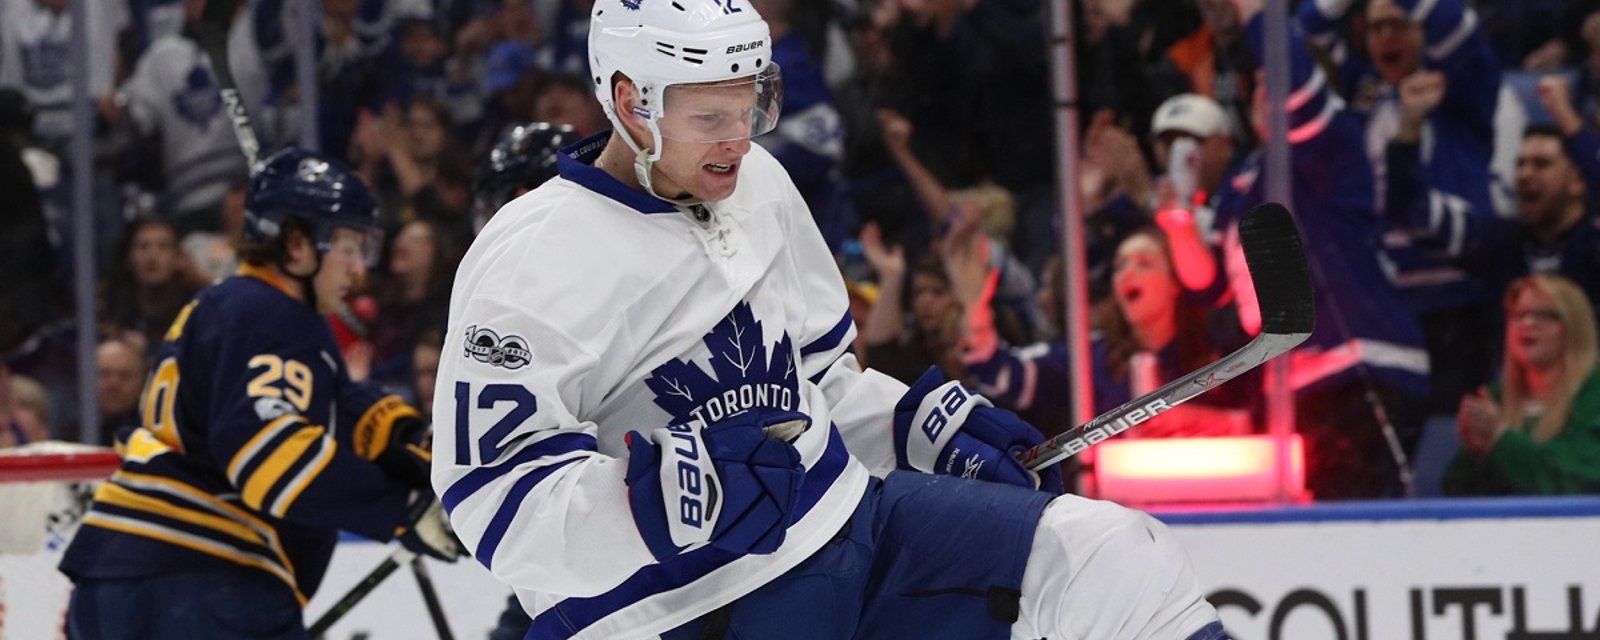 Leafs forward may have revealed his new number for next season.